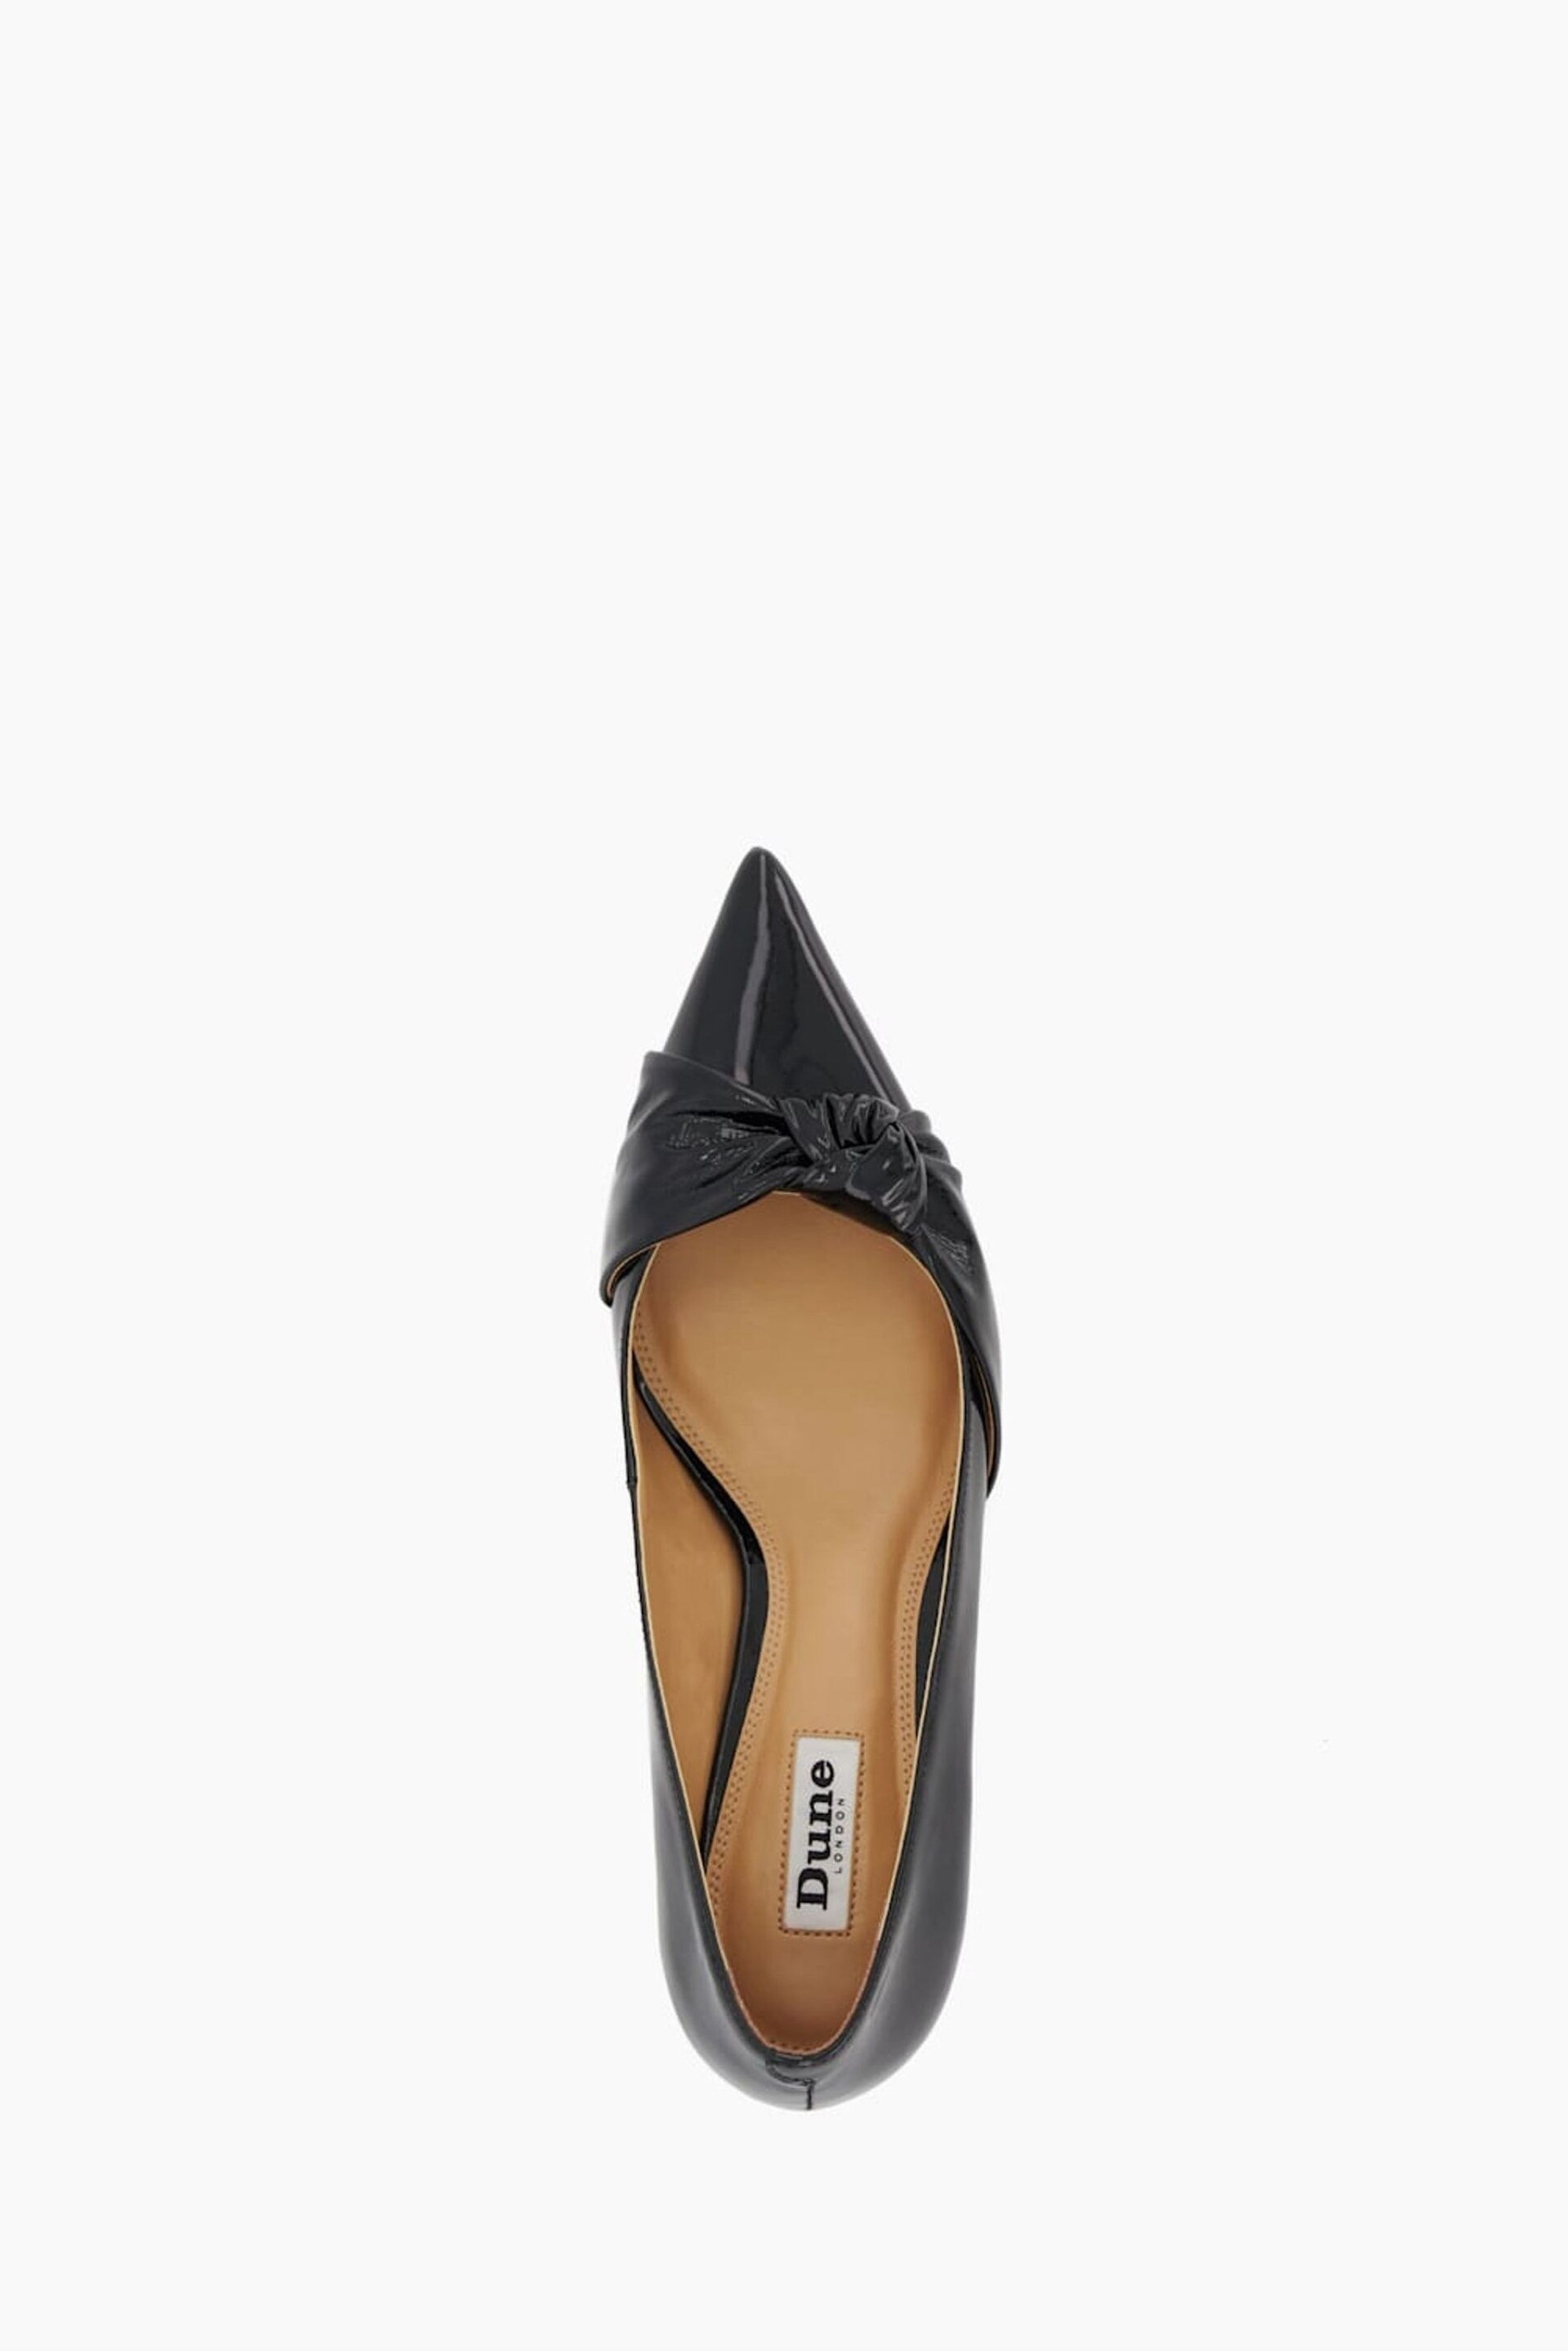 Dune London Black Address Soft Knot Pointed Court Shoes - Image 5 of 5